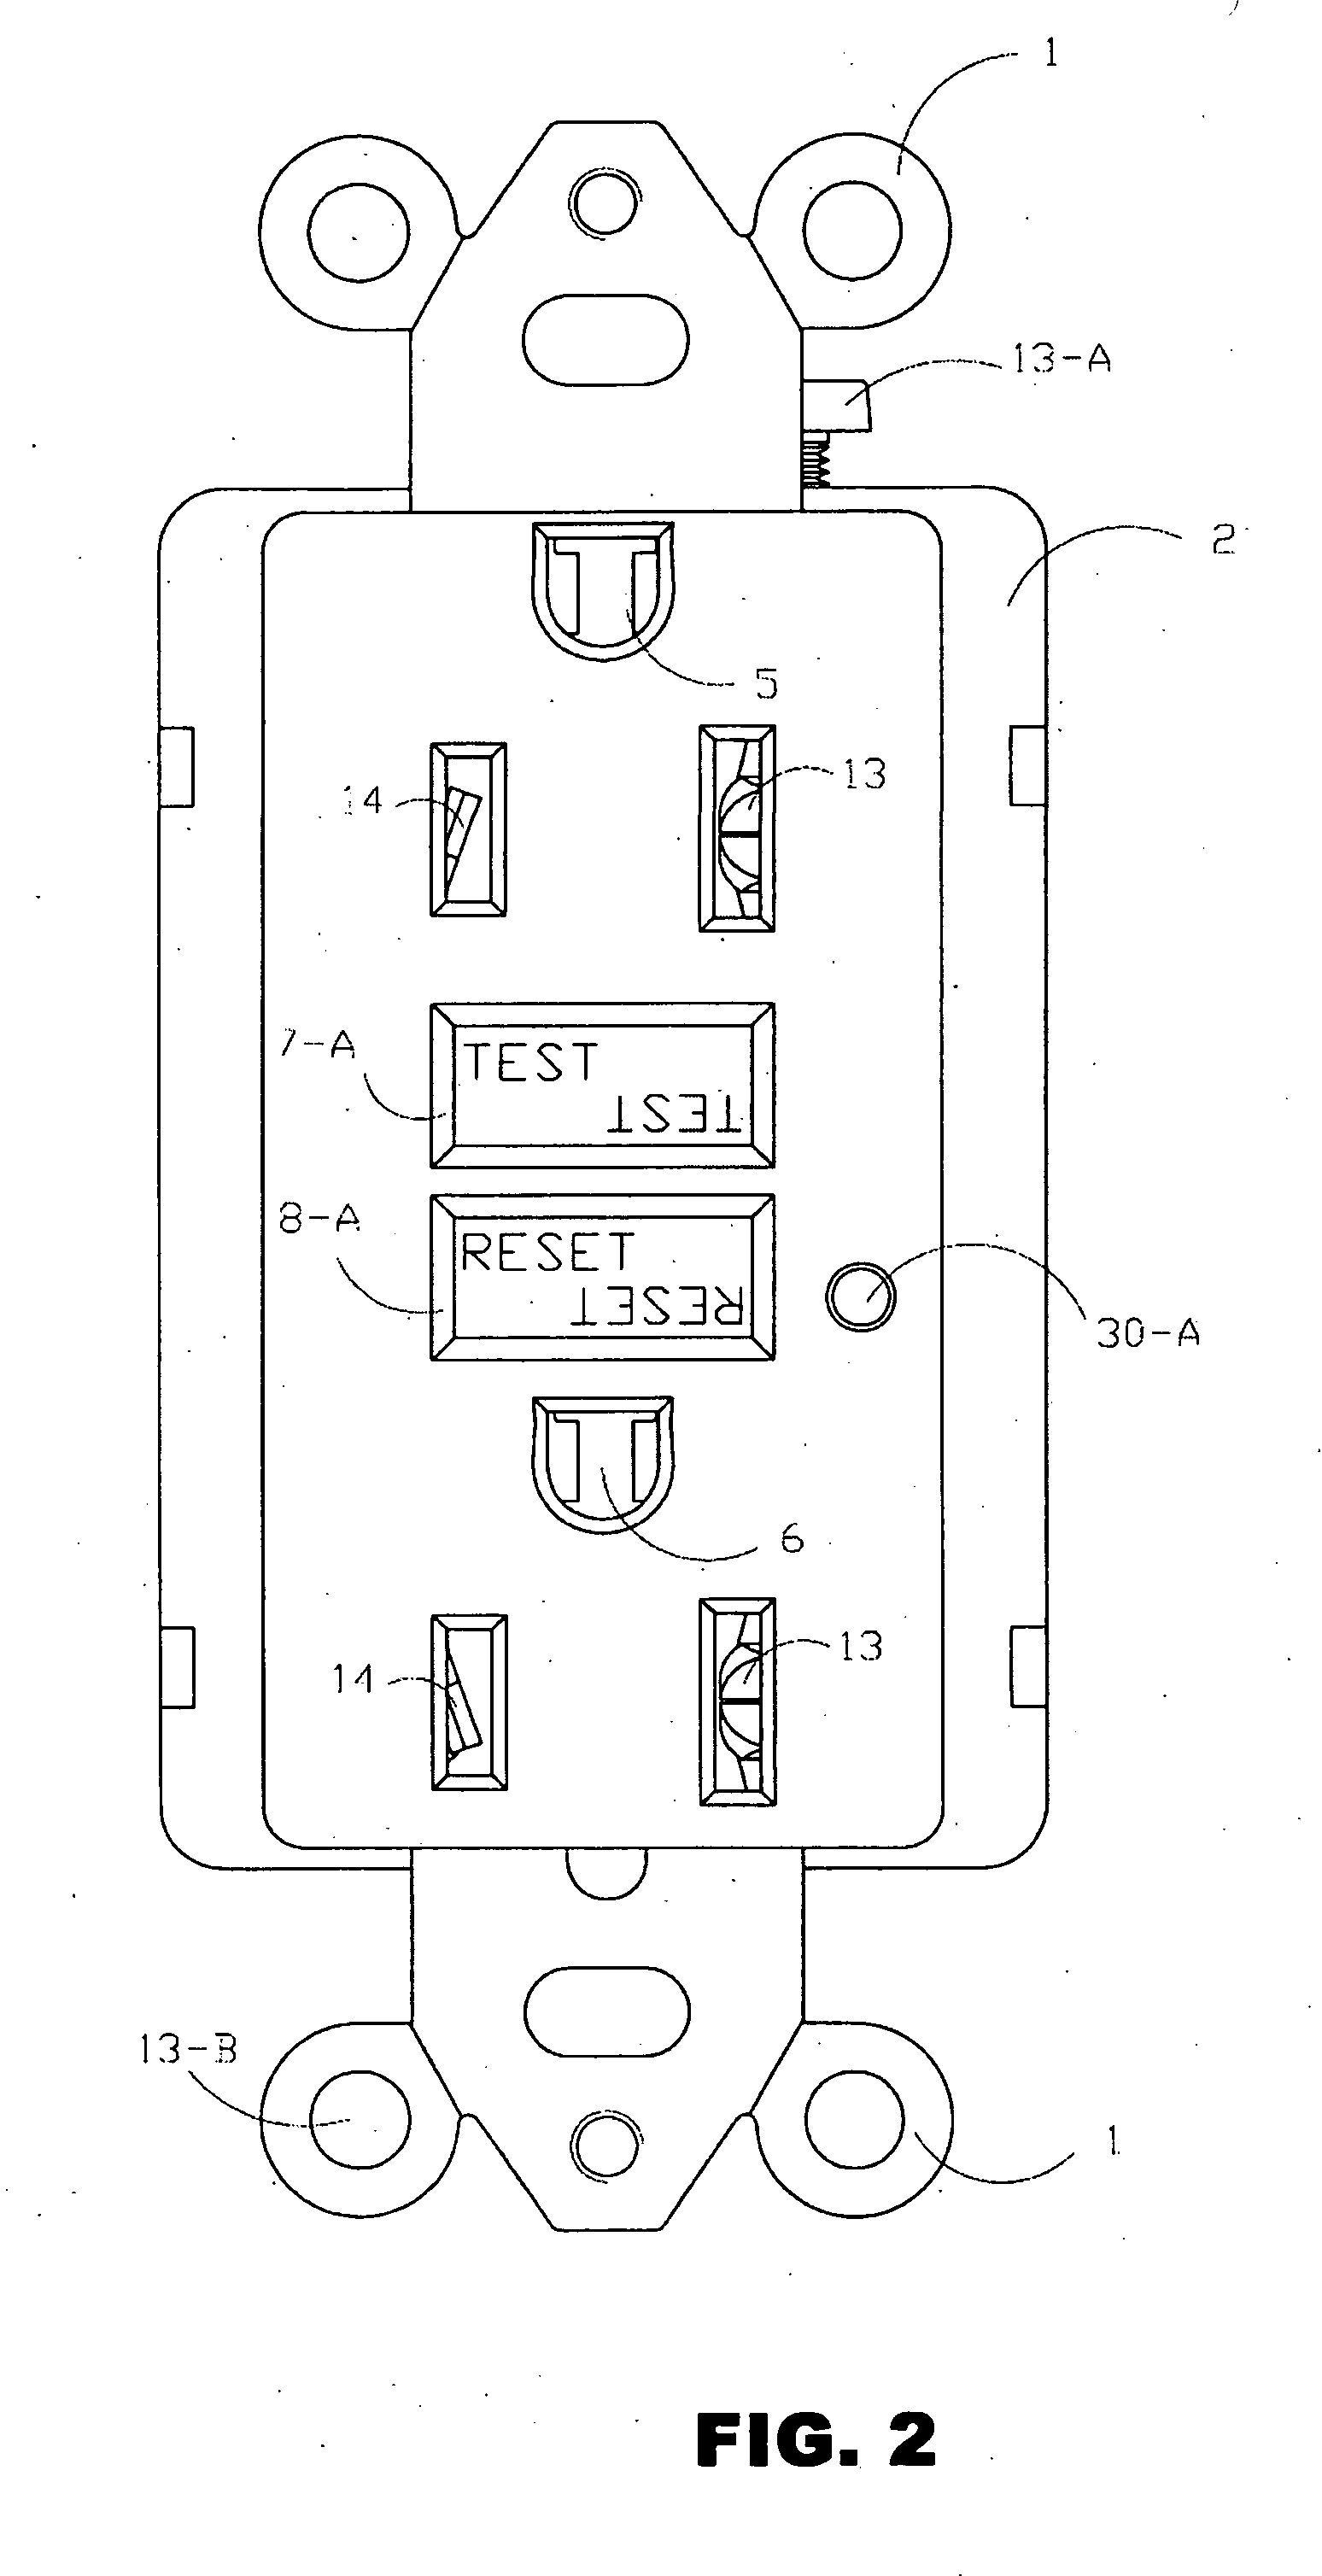 Novel circuit interrupting device with interconnecting reset and test buttons